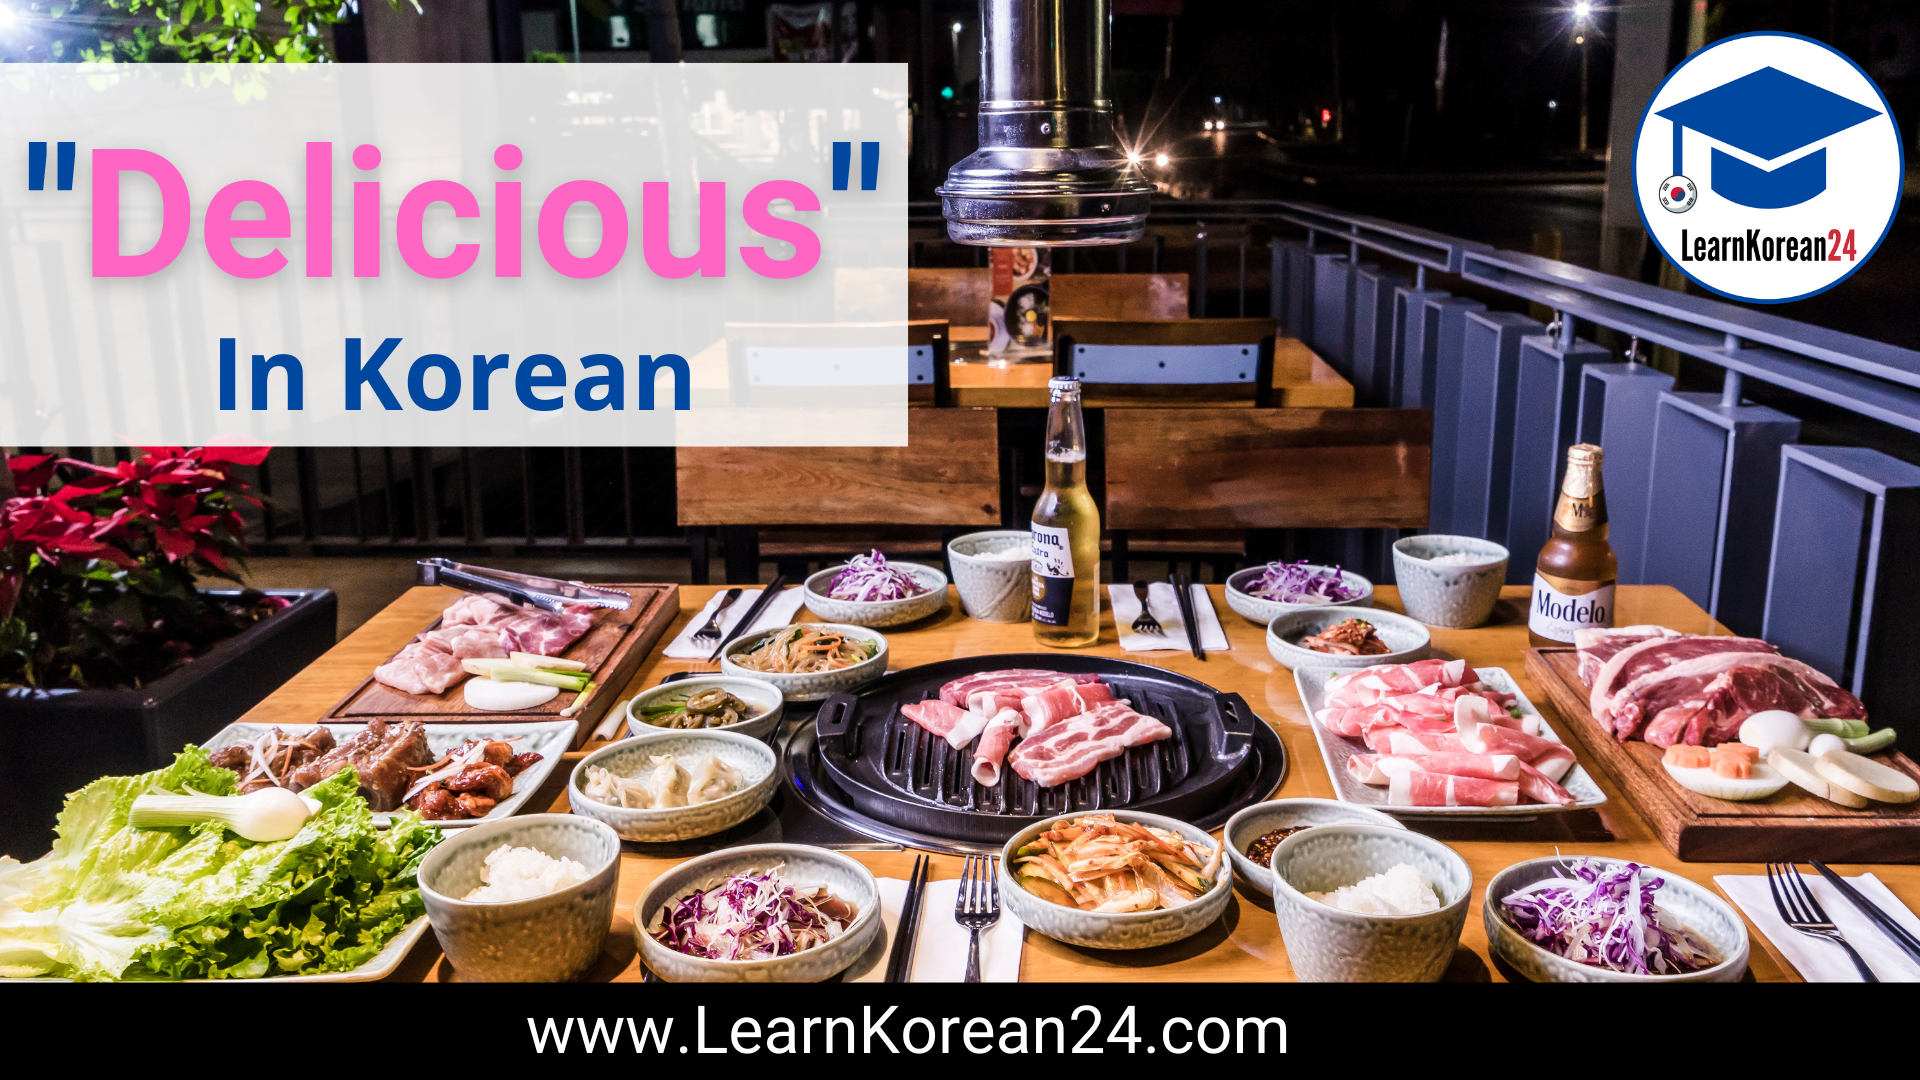 How To Say Delicious In Korean